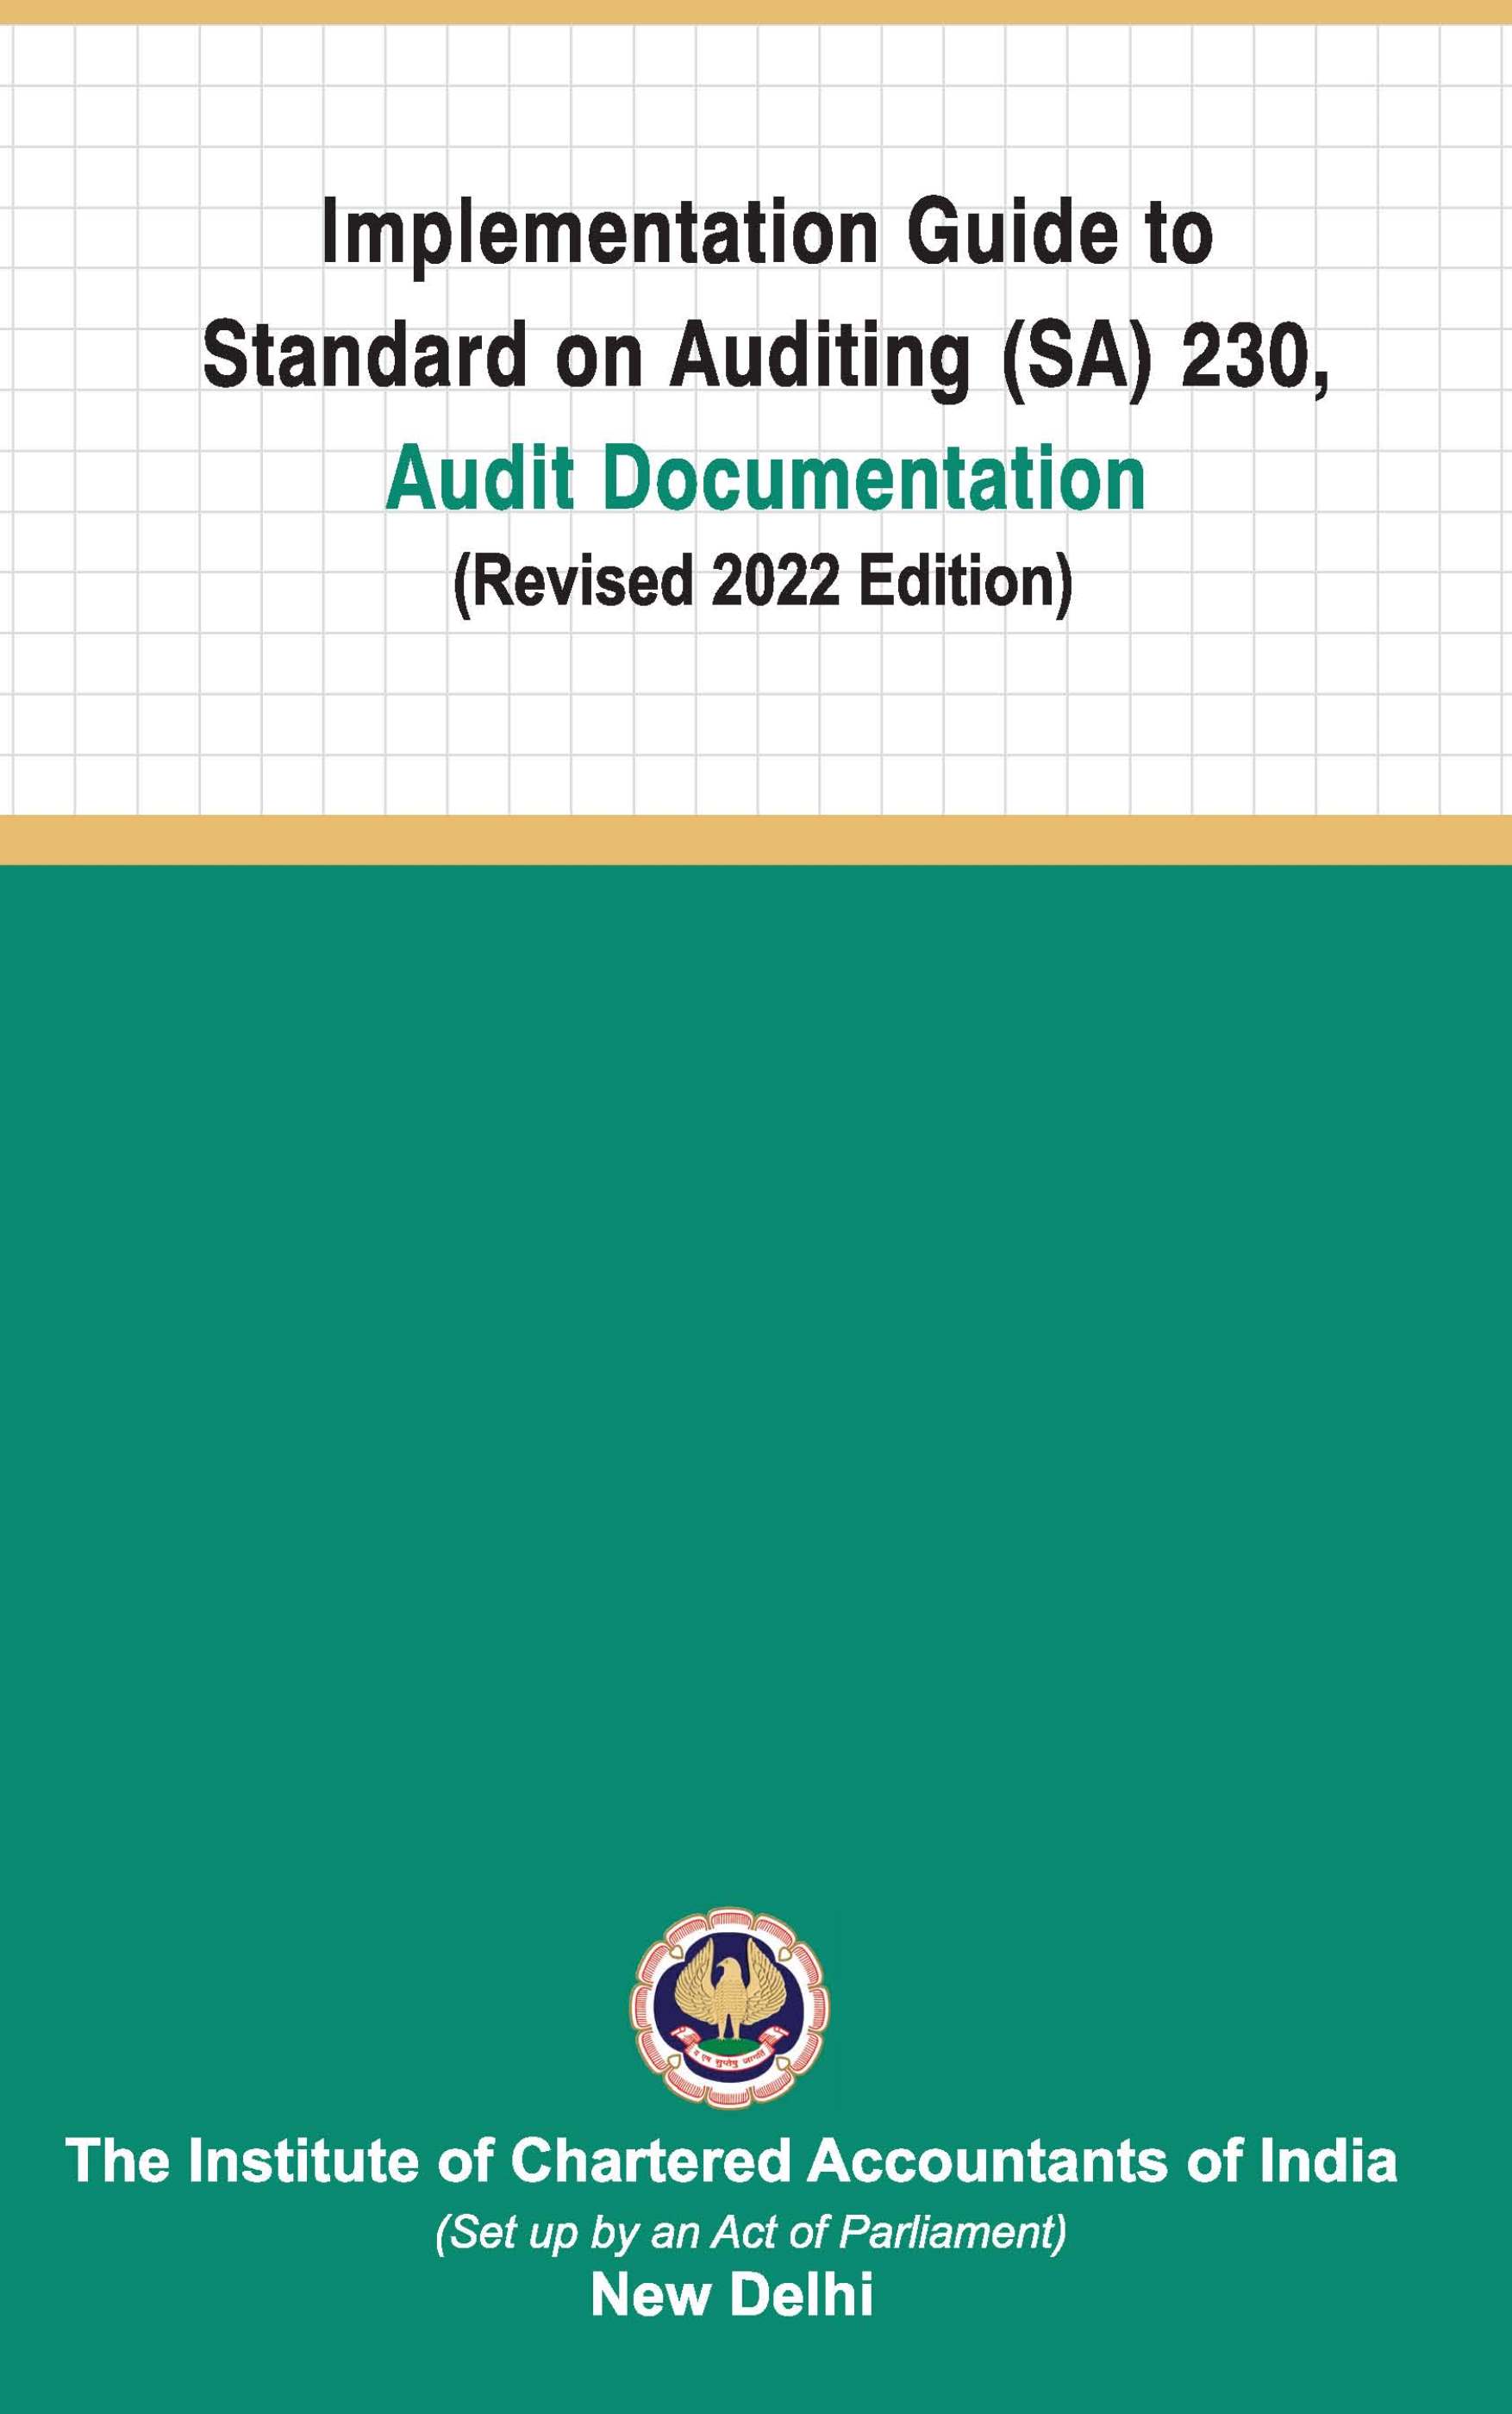 Implementation Guide to Standard on Auditing (SA) 230, Audit Documentation (Revised December, 2022 Edition)